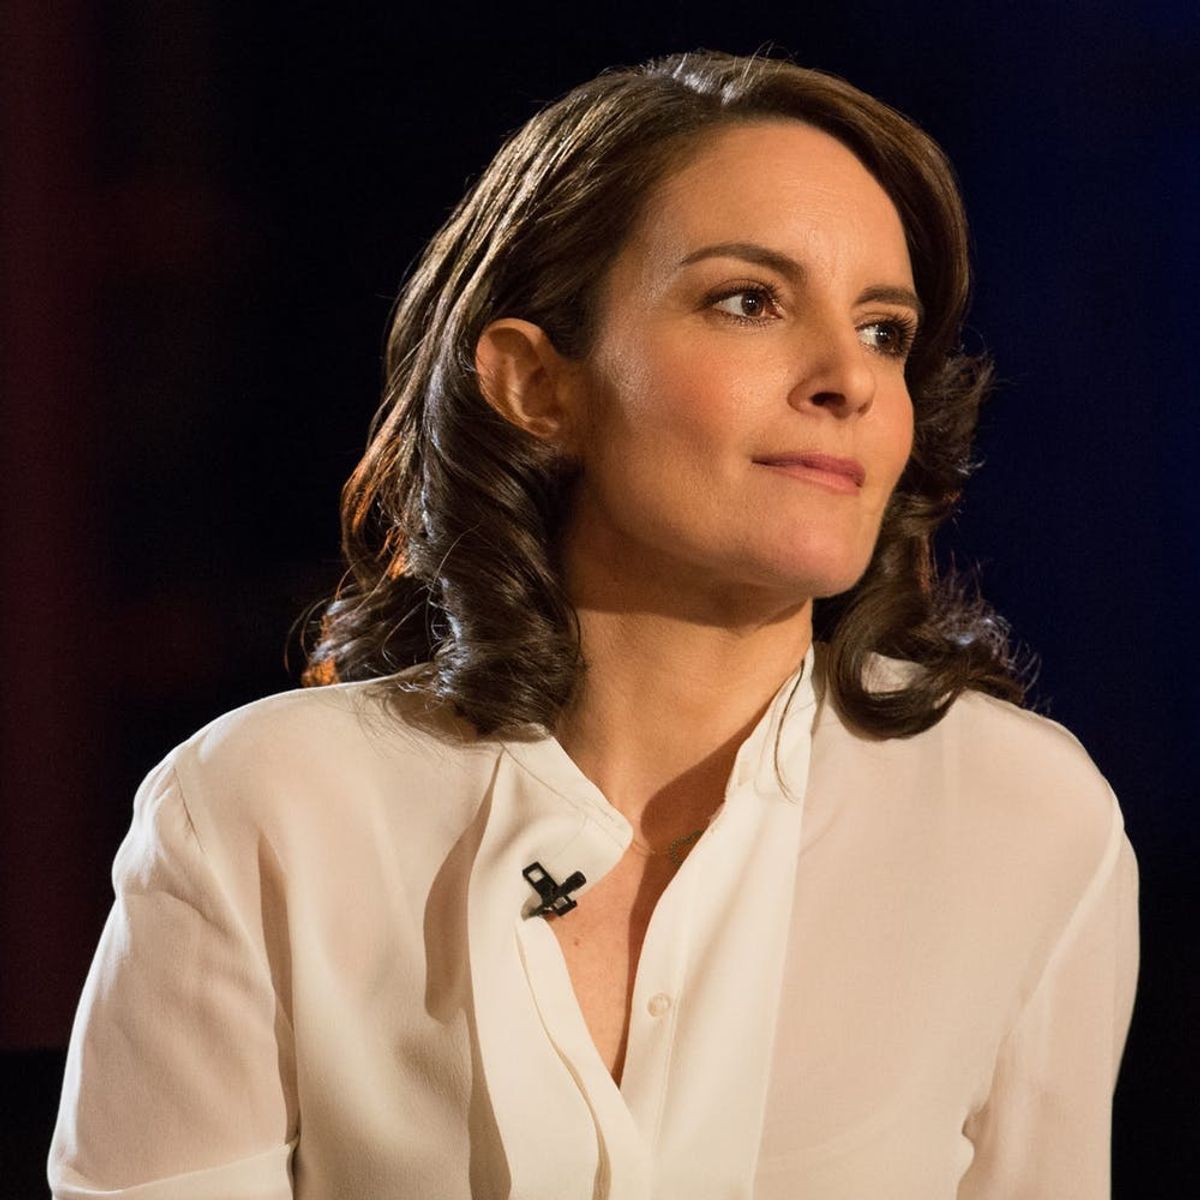 Tina Fey Admits That She Wishes She Could Change Her ‘SNL’ Sheet-Cake Sketch